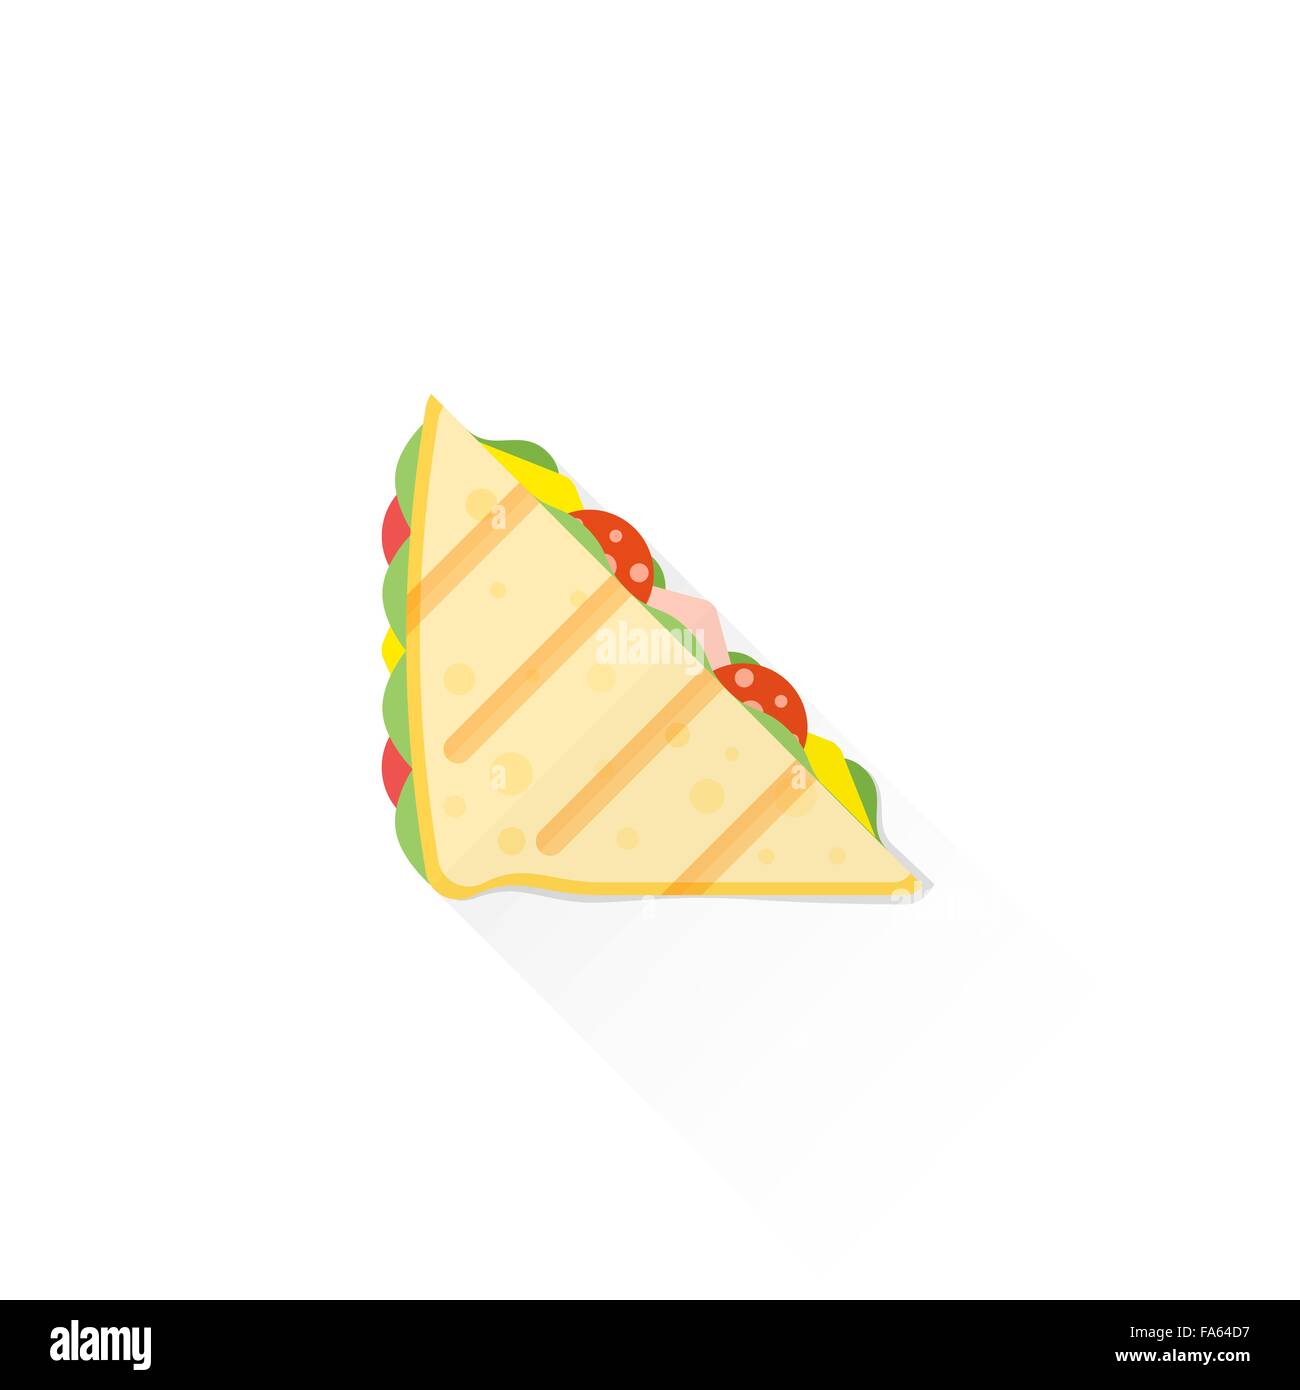 vector fast food grilled bread toast club sandwich ham turkey lettuce tomato cheese flat design isolated illustration on white b Stock Vector